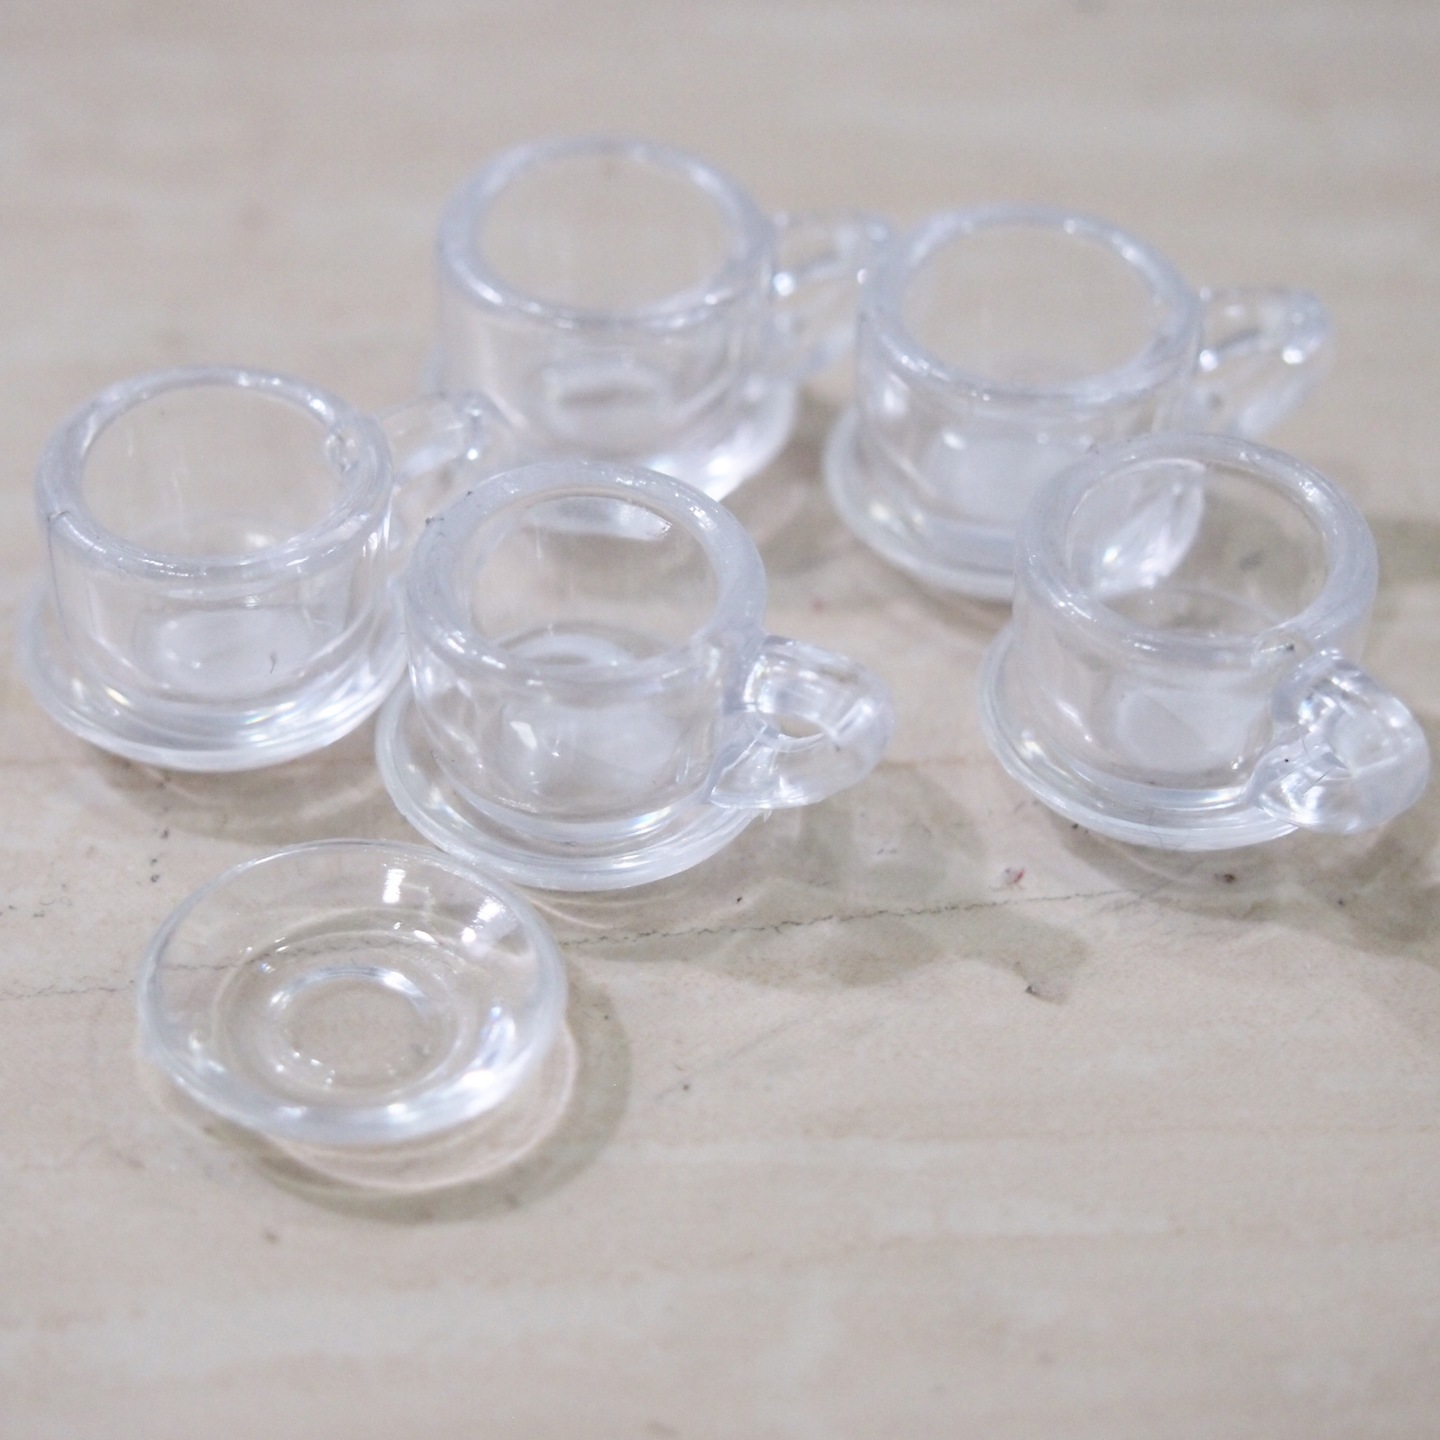 Miniatures - 10 Plastic Coffee Cup set for Dollhouse Display